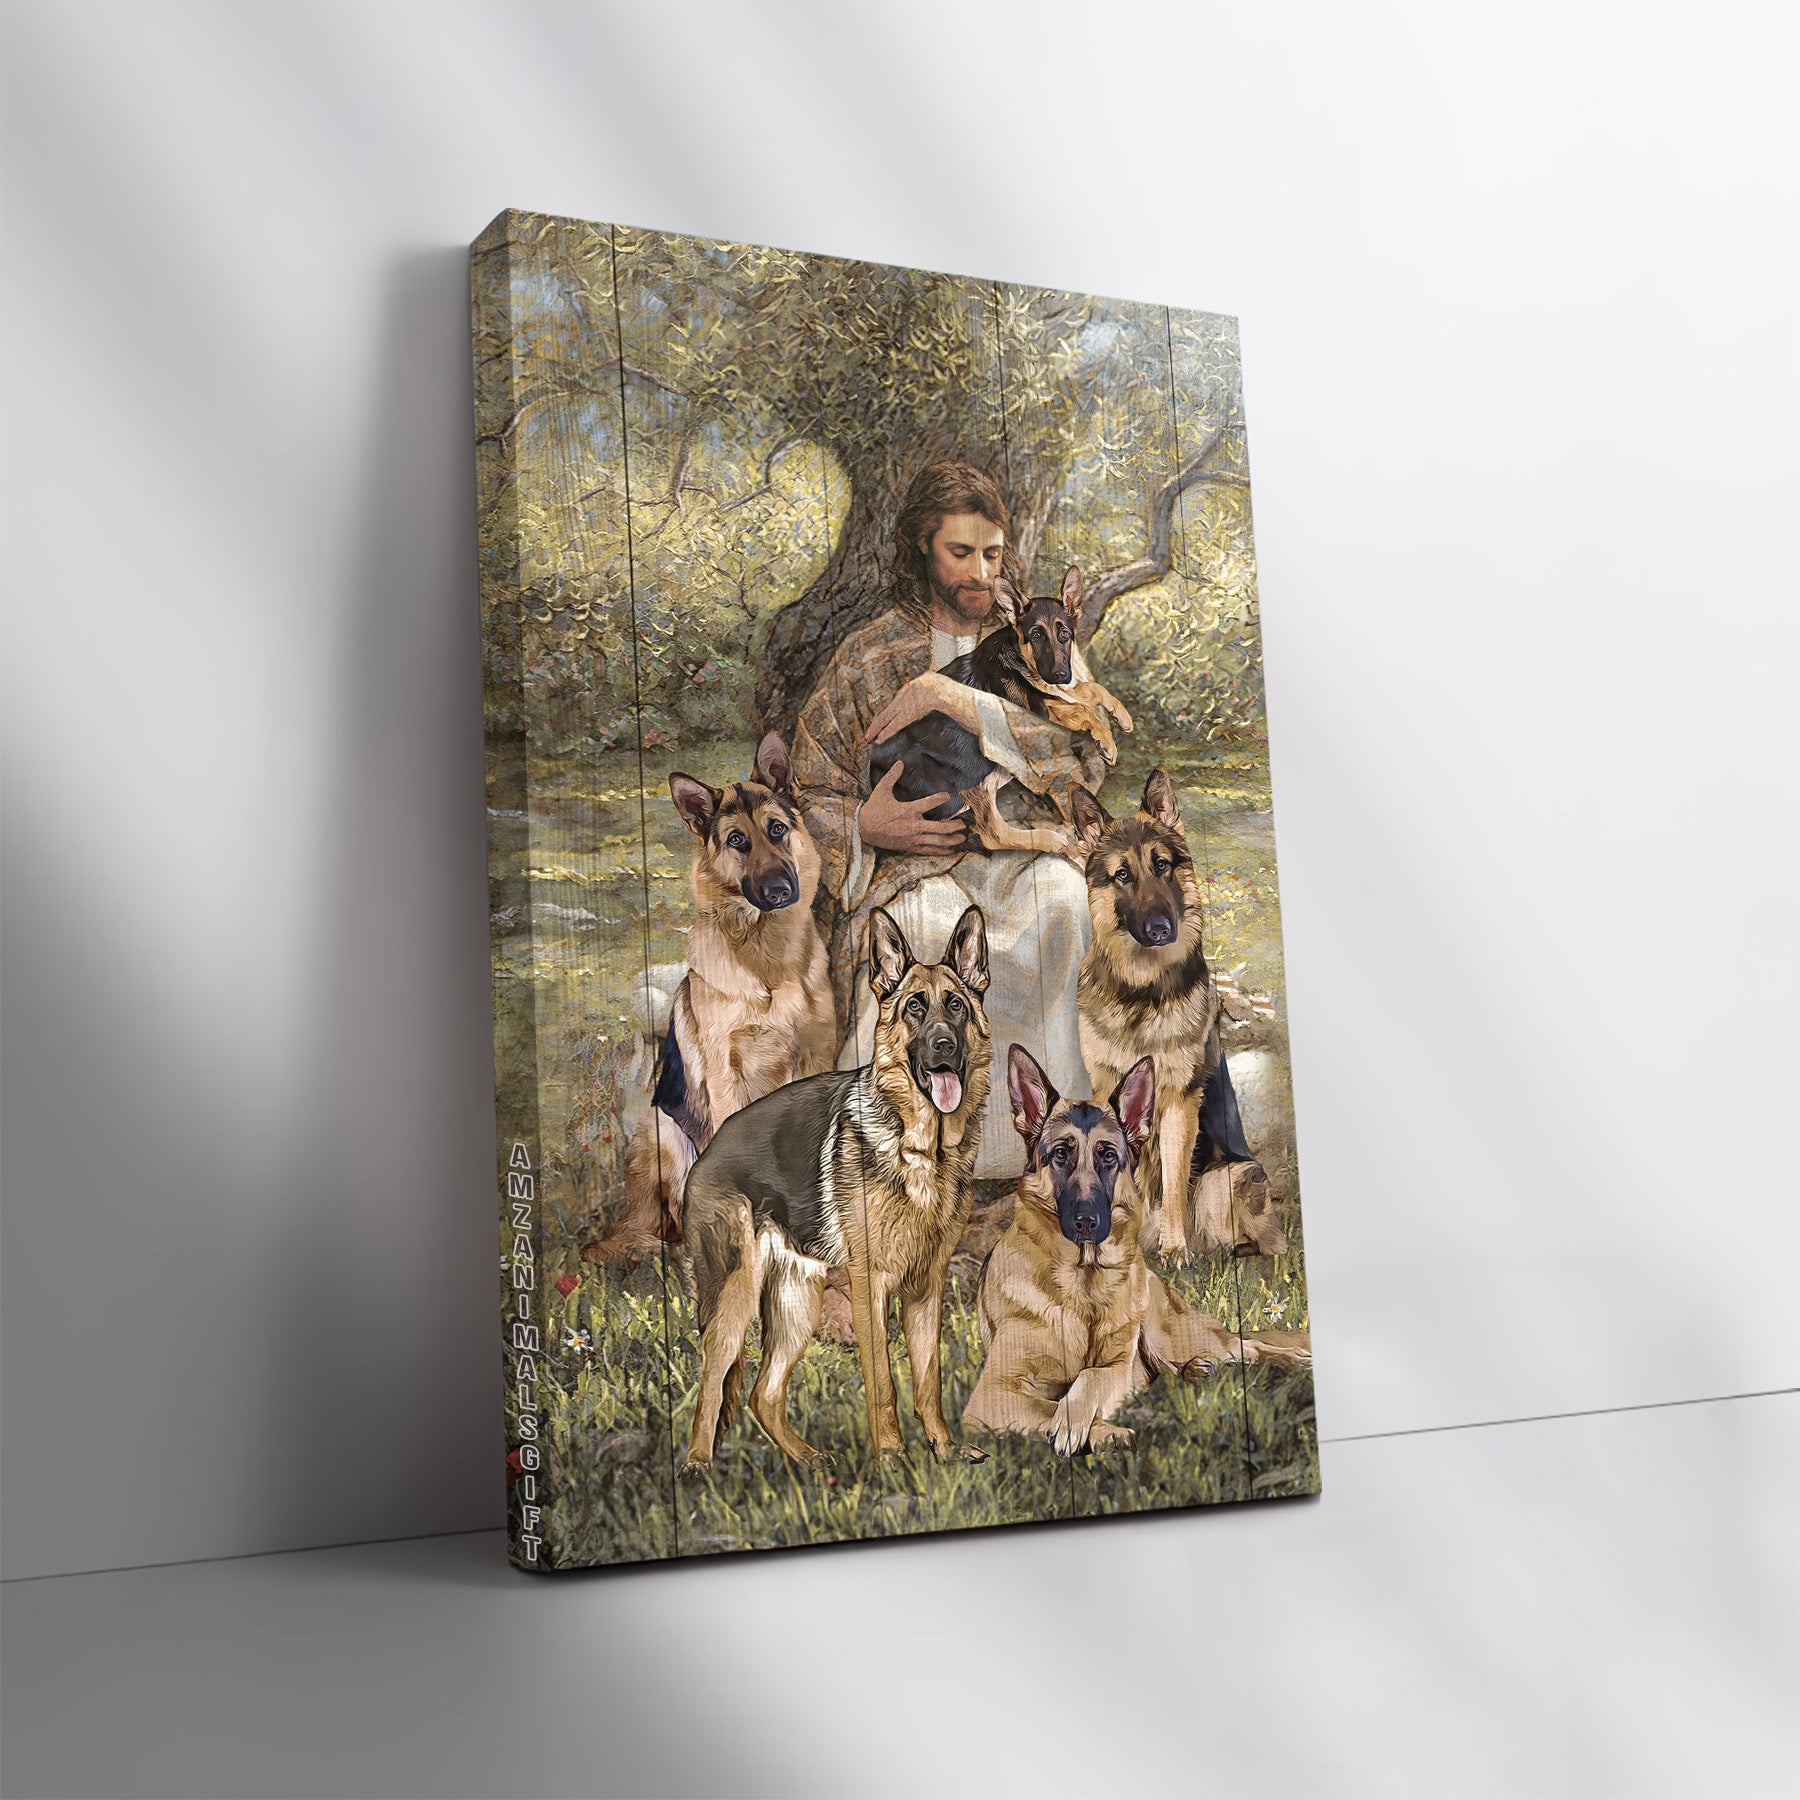 German Shepherd & Jesus Premium Wrapped Portrait Canvas - Cute German Shepherd, The world In His Arm, Stunning Forest - Gift For Christian, Dog Lovers